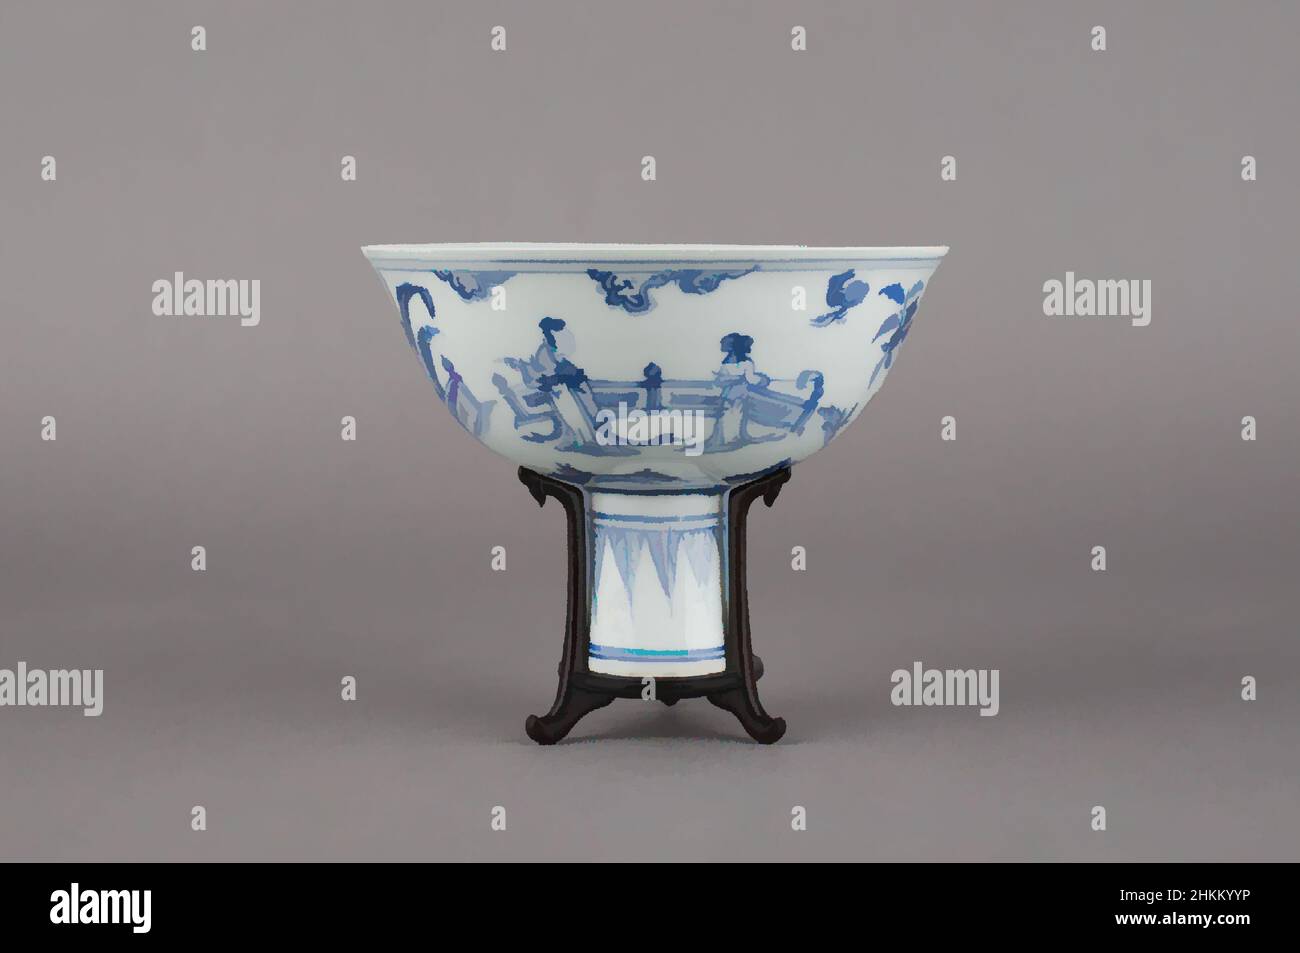 Art inspired by Stem Cup with Design of Four Ladies in Garden Landscapes, Chinese, Ming dynasty, 1368-1644, Chenghua period, 1465-1487, or Hongzhi period, 1488-1505, late 15th century, Jingdezhen ware; porcelain with underglaze cobalt blue decoration, Made in Jingdezhen, Jiangxi, Classic works modernized by Artotop with a splash of modernity. Shapes, color and value, eye-catching visual impact on art. Emotions through freedom of artworks in a contemporary way. A timeless message pursuing a wildly creative new direction. Artists turning to the digital medium and creating the Artotop NFT Stock Photo